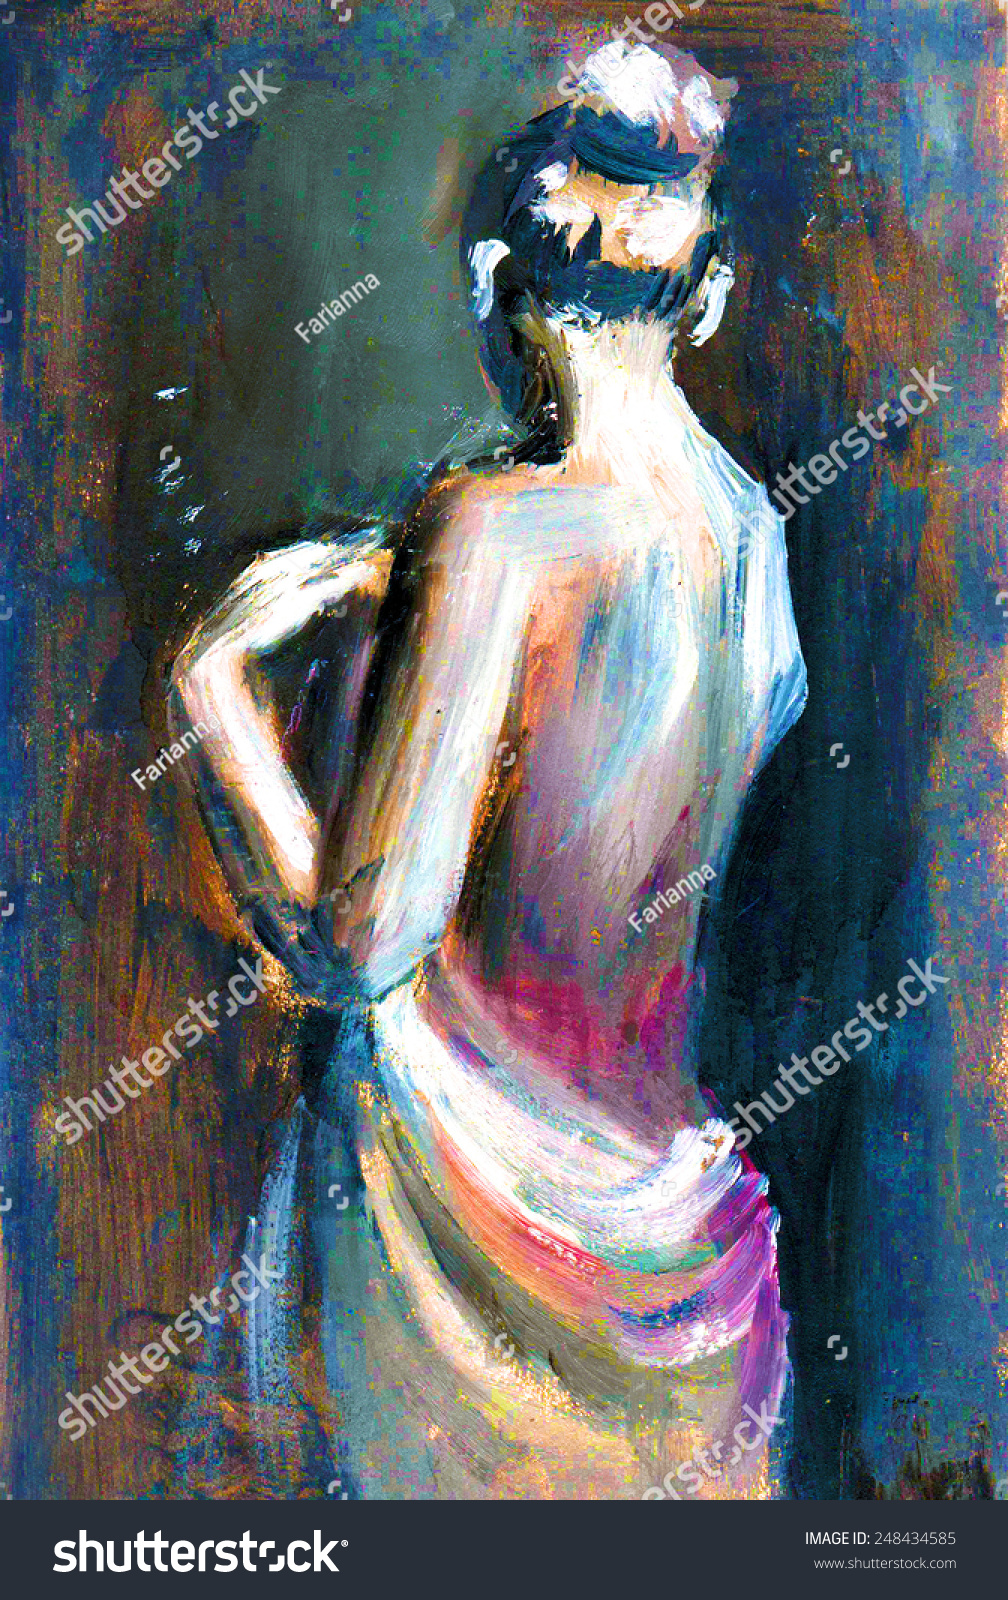 Expressive Oil Painting Woman Figure Illustration Stock